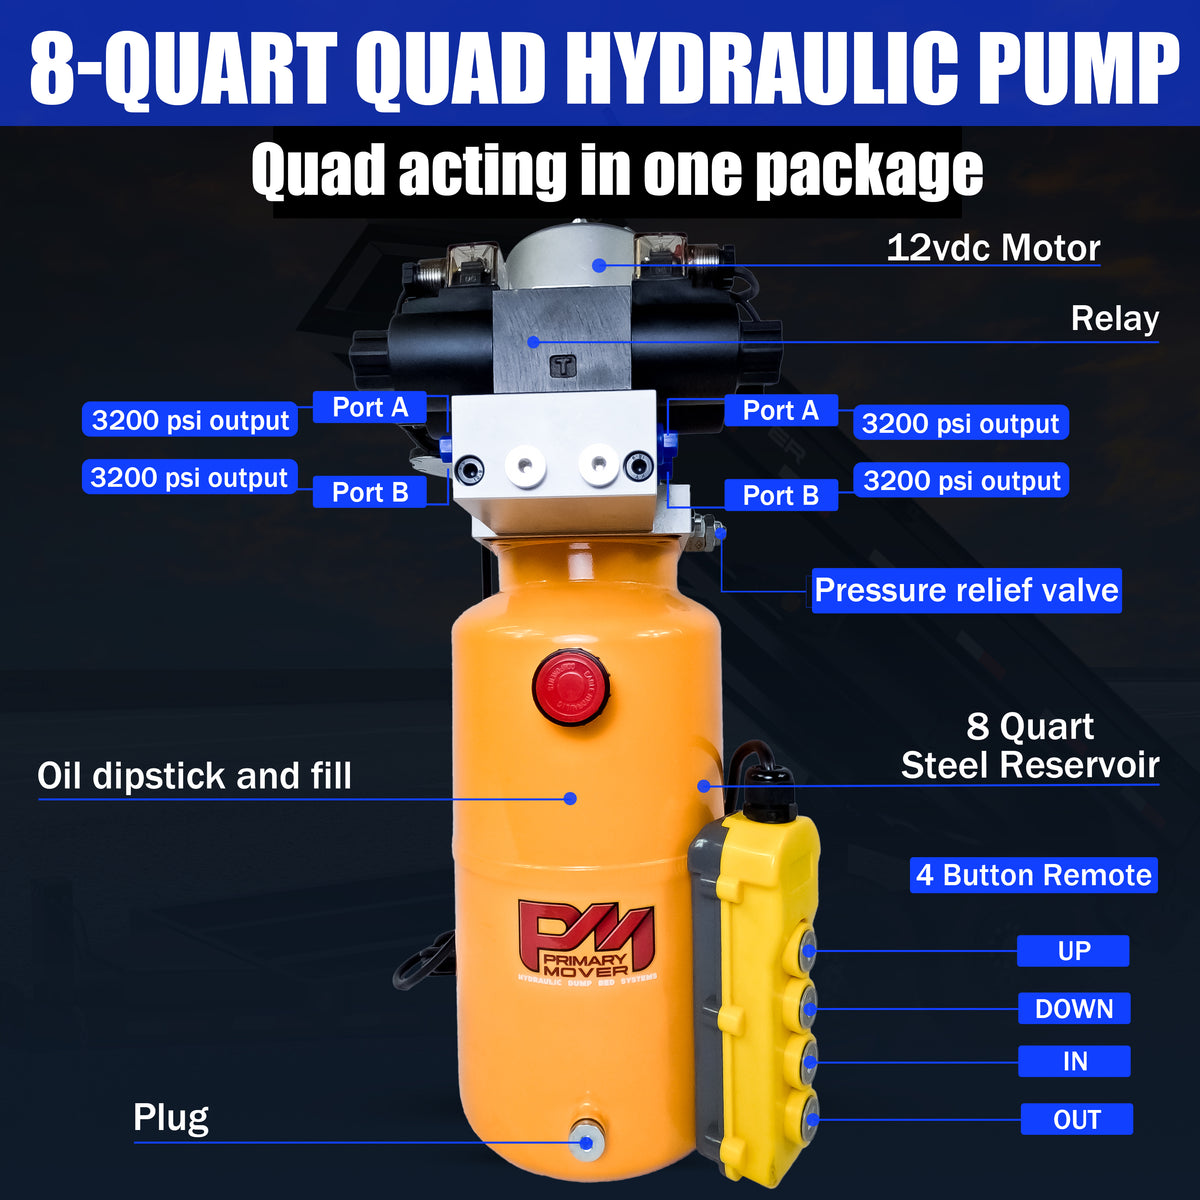 Compact yet powerful Dual Double-Acting Hydraulic Power Unit from PrimaryMover.com, ideal for dump trailers and trucks, offering quad power capability for versatile hydraulic operations. Used for any truck or trailer application. 1/2 ton truck dump bed ki